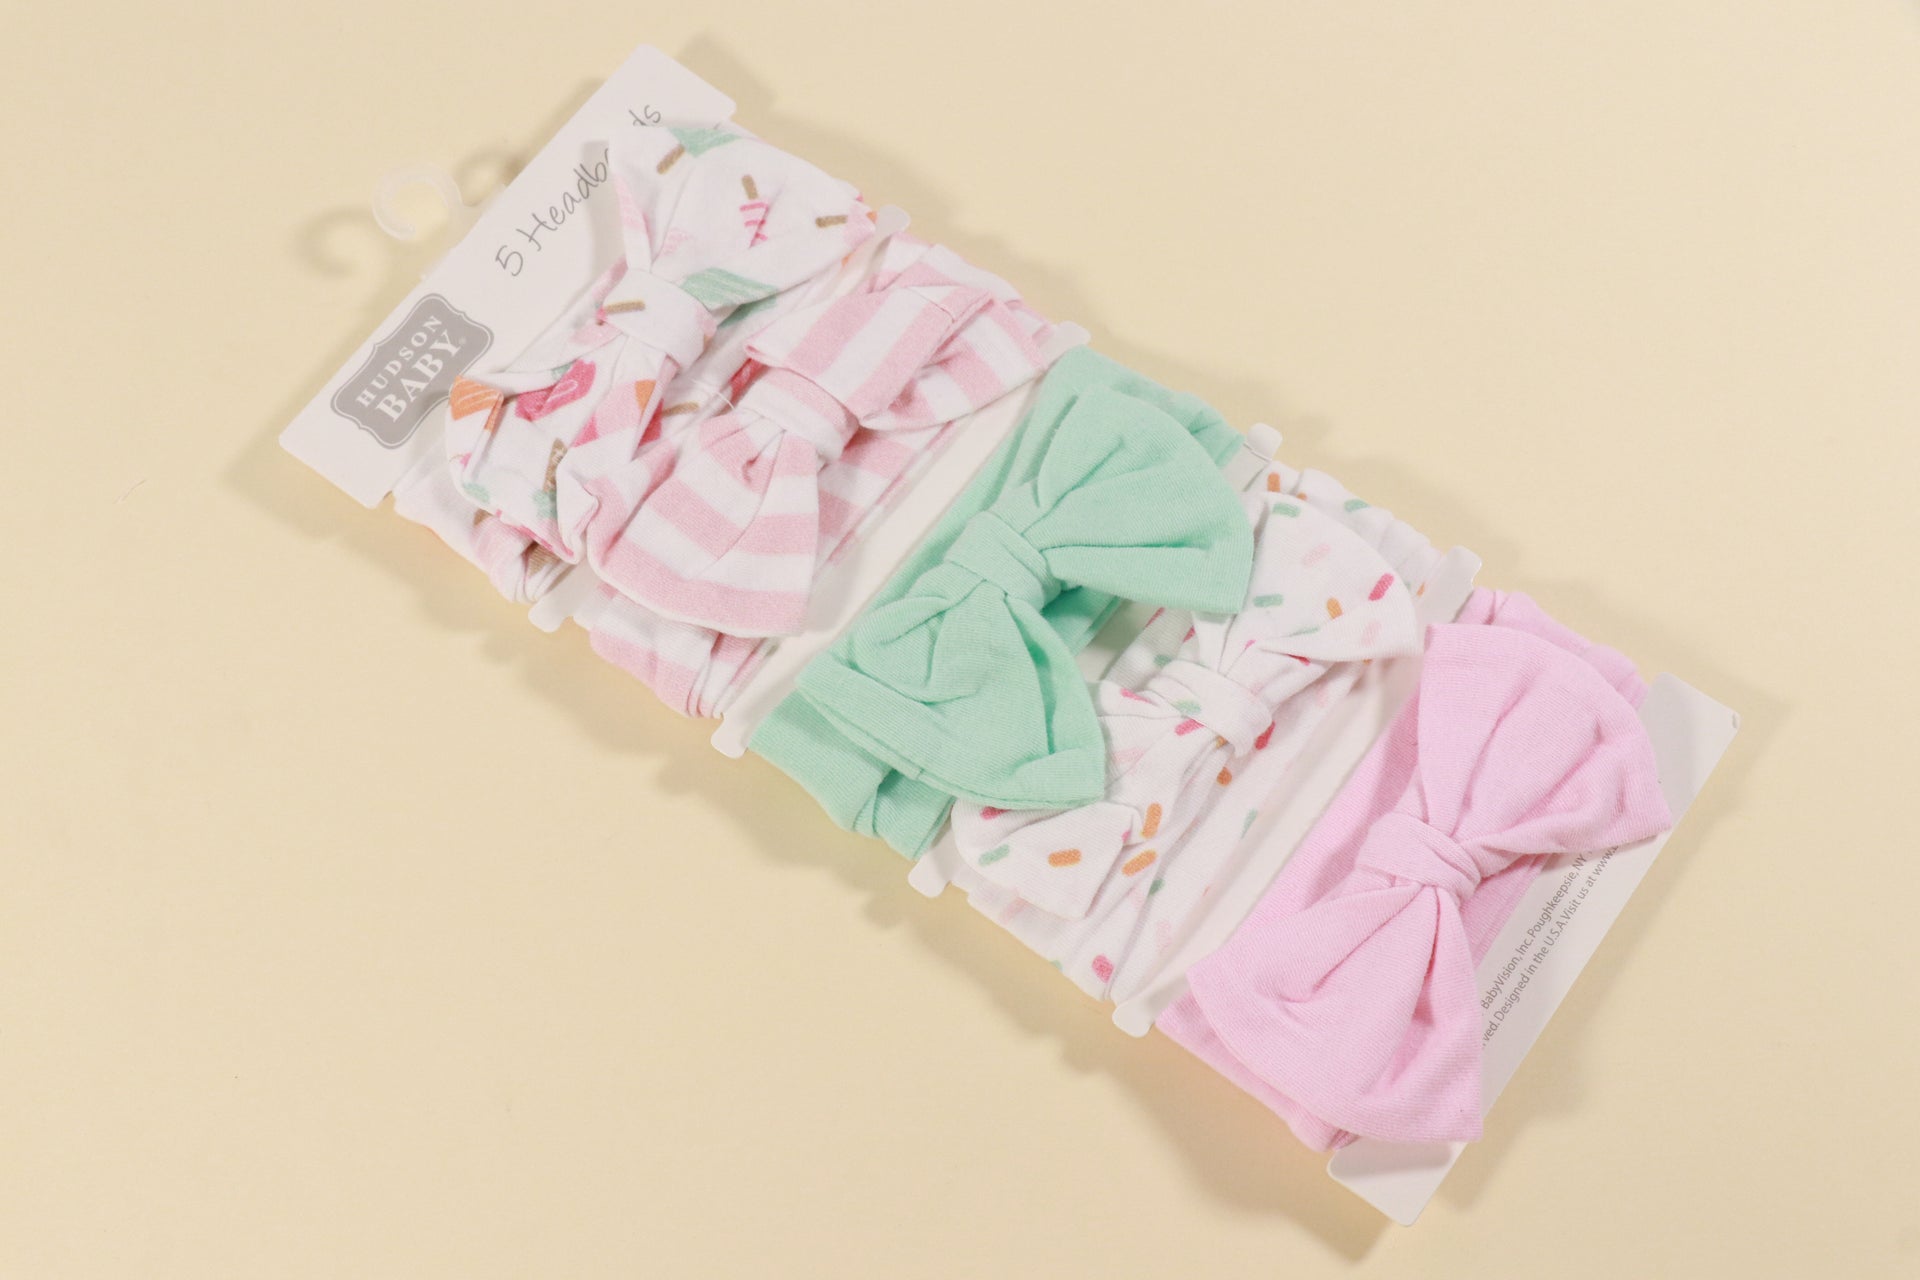 Hudson Baby Diapers 